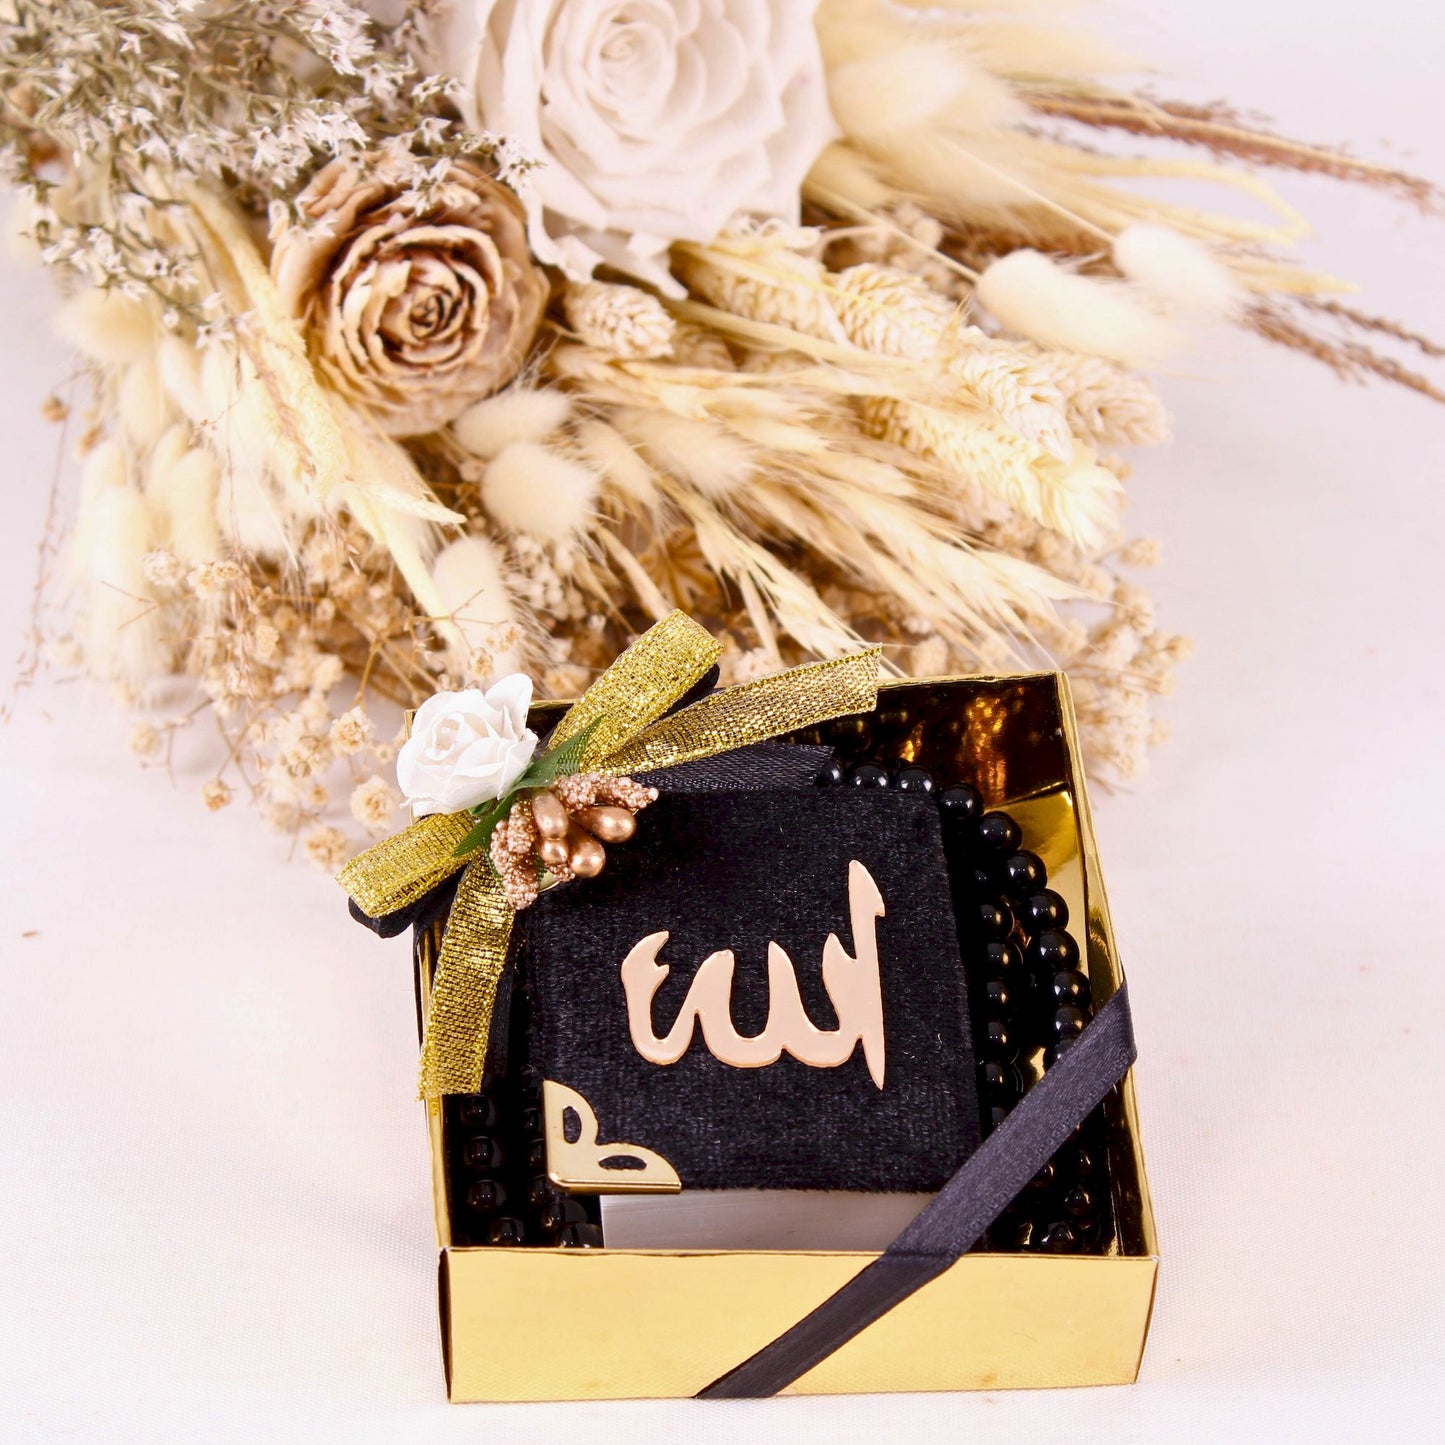 Personalized Mini Quran Pearl Prayer Beads Flower Décor Wedding Favor - Islamic Elite Favors is a handmade gift shop offering a wide variety of unique and personalized gifts for all occasions. Whether you're looking for the perfect Ramadan, Eid, Hajj, wedding gift or something special for a birthday, baby shower or anniversary, we have something for everyone. High quality, made with love.